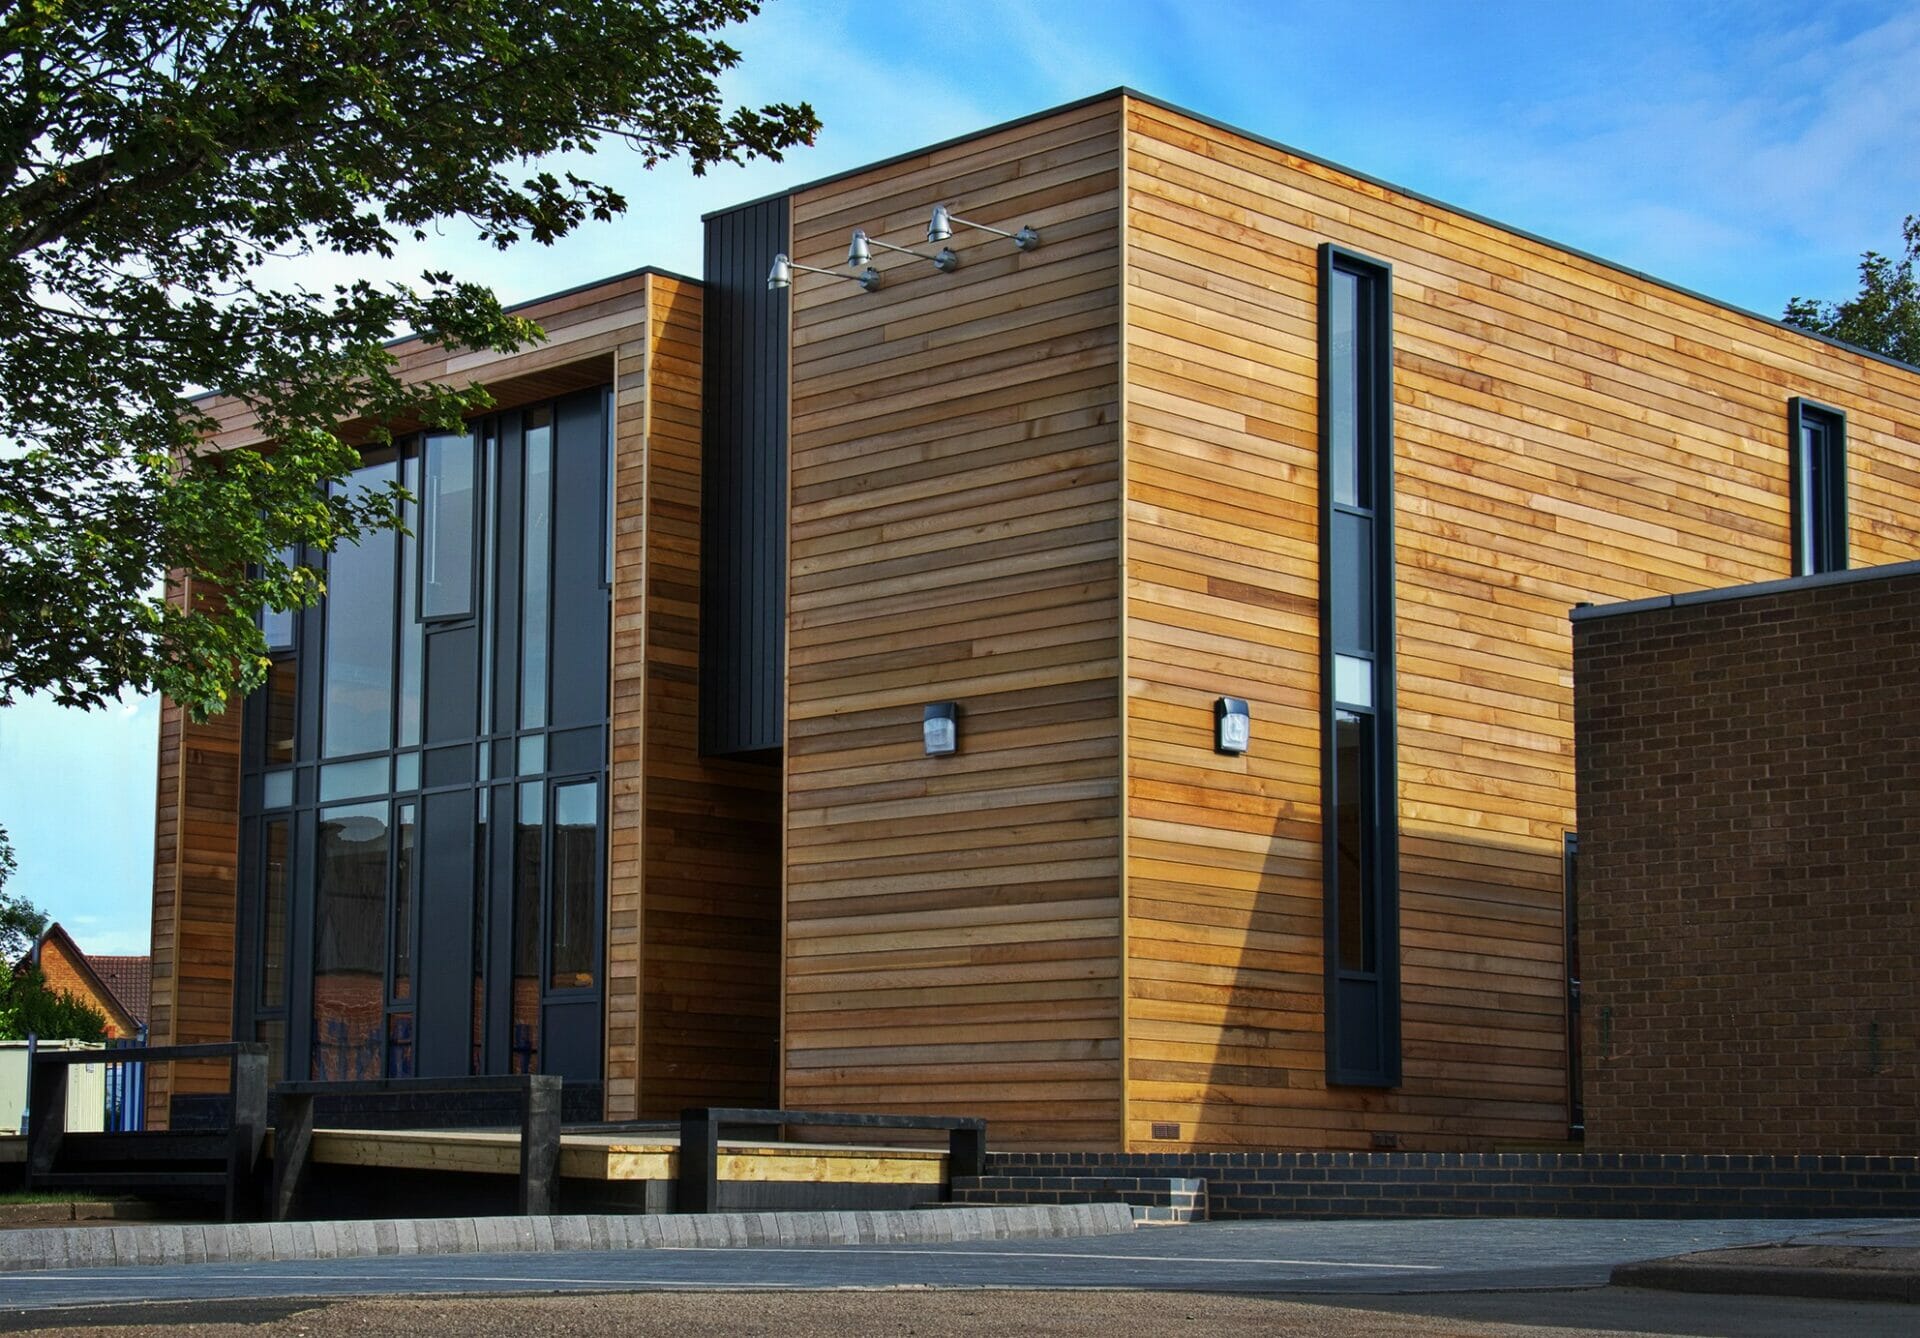 Aston Manor Sixth Form Centre were built using SIPS